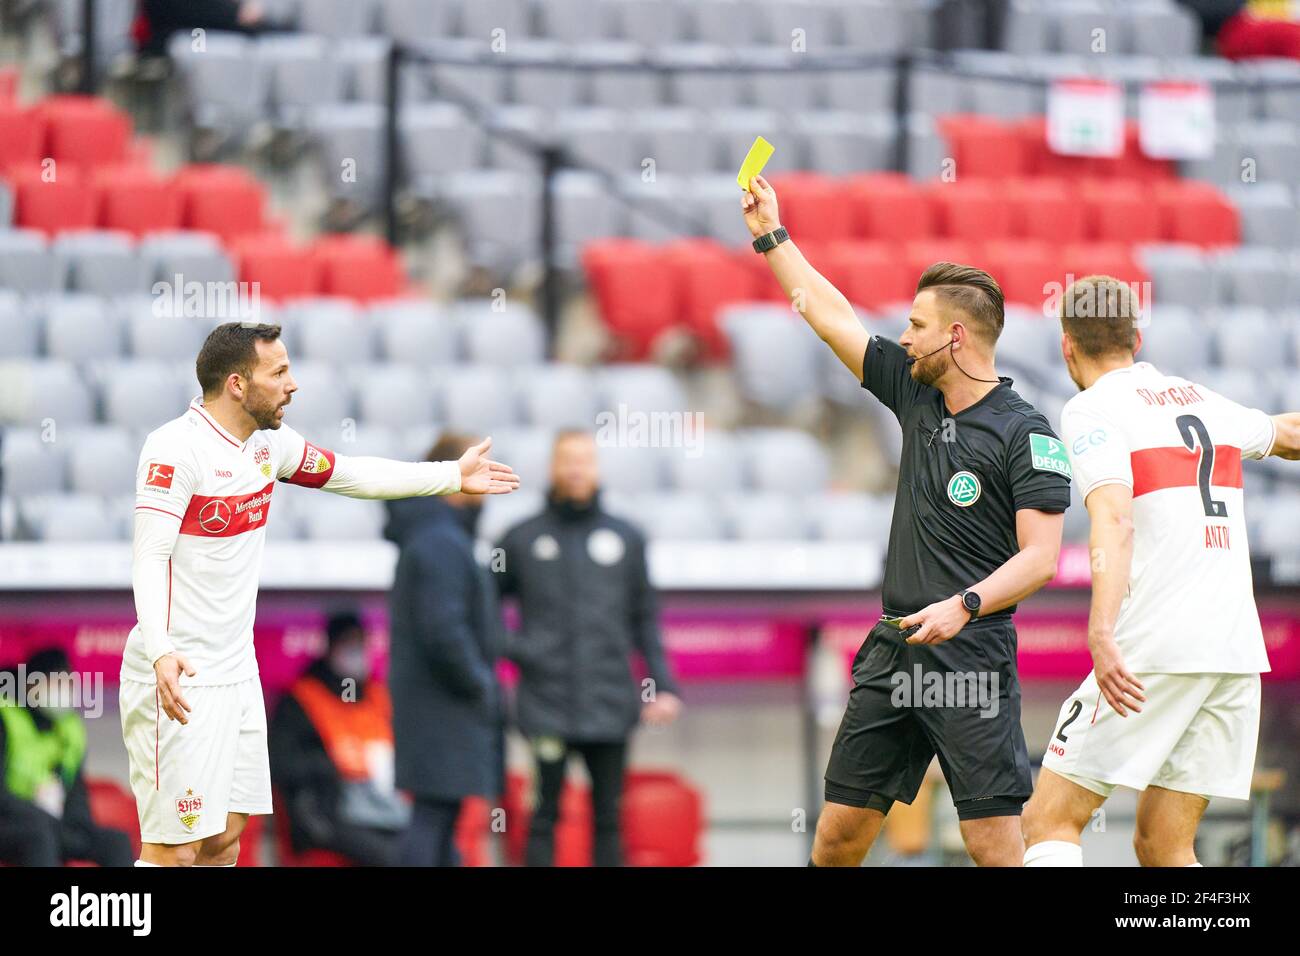 Munich, Germany. 20th Mar, 2021. Referee Daniel SCHLAGER with whistle, gestures, shows, watch, individual action, Schiedsrichter, Hauptschiedsrichter, shows the Yellow Card to Gonzalo CASTRO, VFB 8 in the match FC BAYERN MUENCHEN - VFB STUTTGART 4-0 1.German Football League on March 20, 2021 in Munich, Germany Season 2020/2021, matchday 26, 1.Bundesliga, FCB, München, 26.Spieltag Credit: Peter Schatz/Alamy Live News Stock Photo